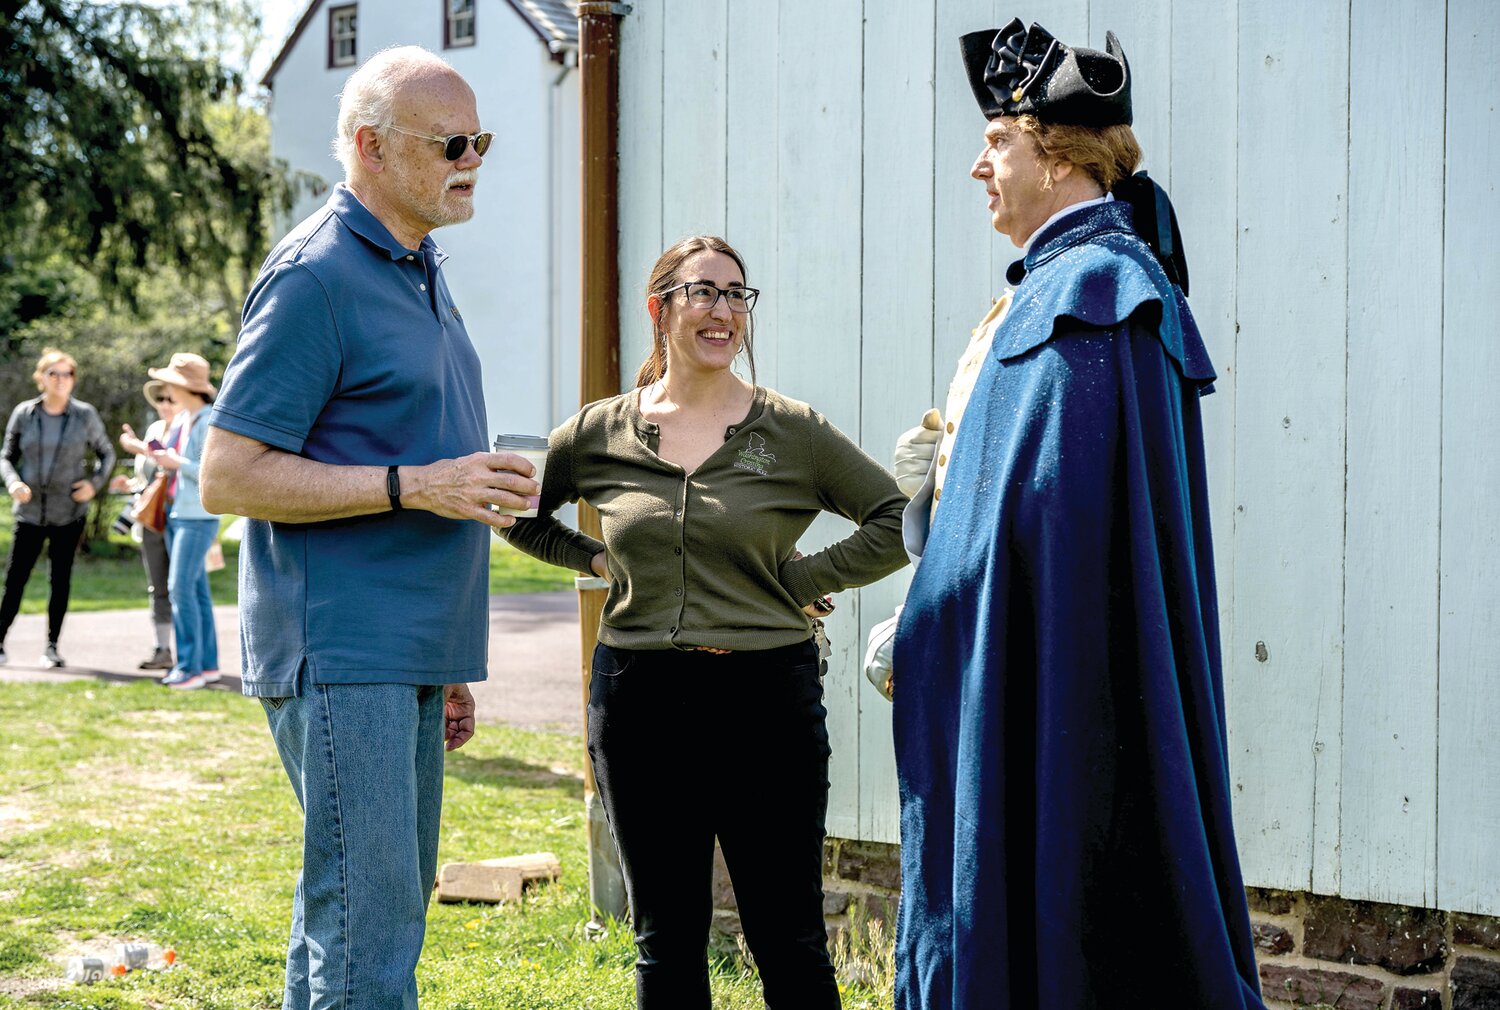 Jennifer Martin, executive director for the Friends of Washington Crossing Park, chats with executive producer Ralph Augstroze, left, and Daniel H.T. Shippey, who plays George Washington.